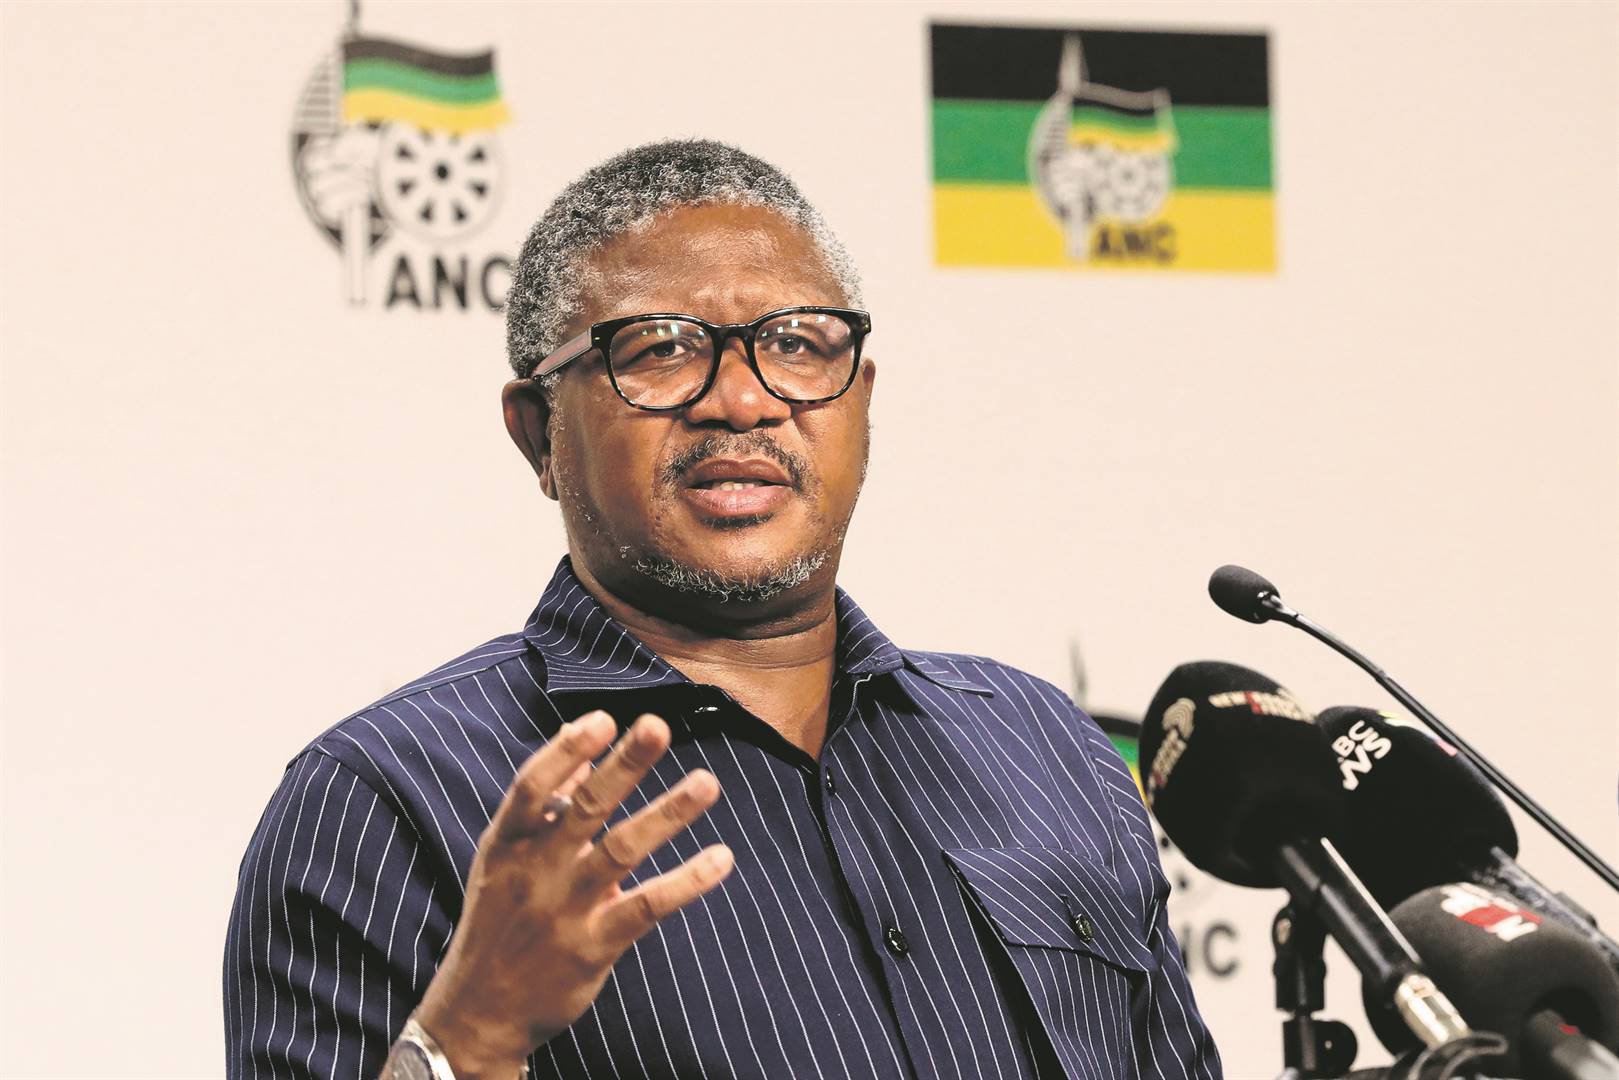 News24 | ANC SG Fikile Mbalula issues stern warning to members engaging in public spats ahead of election 